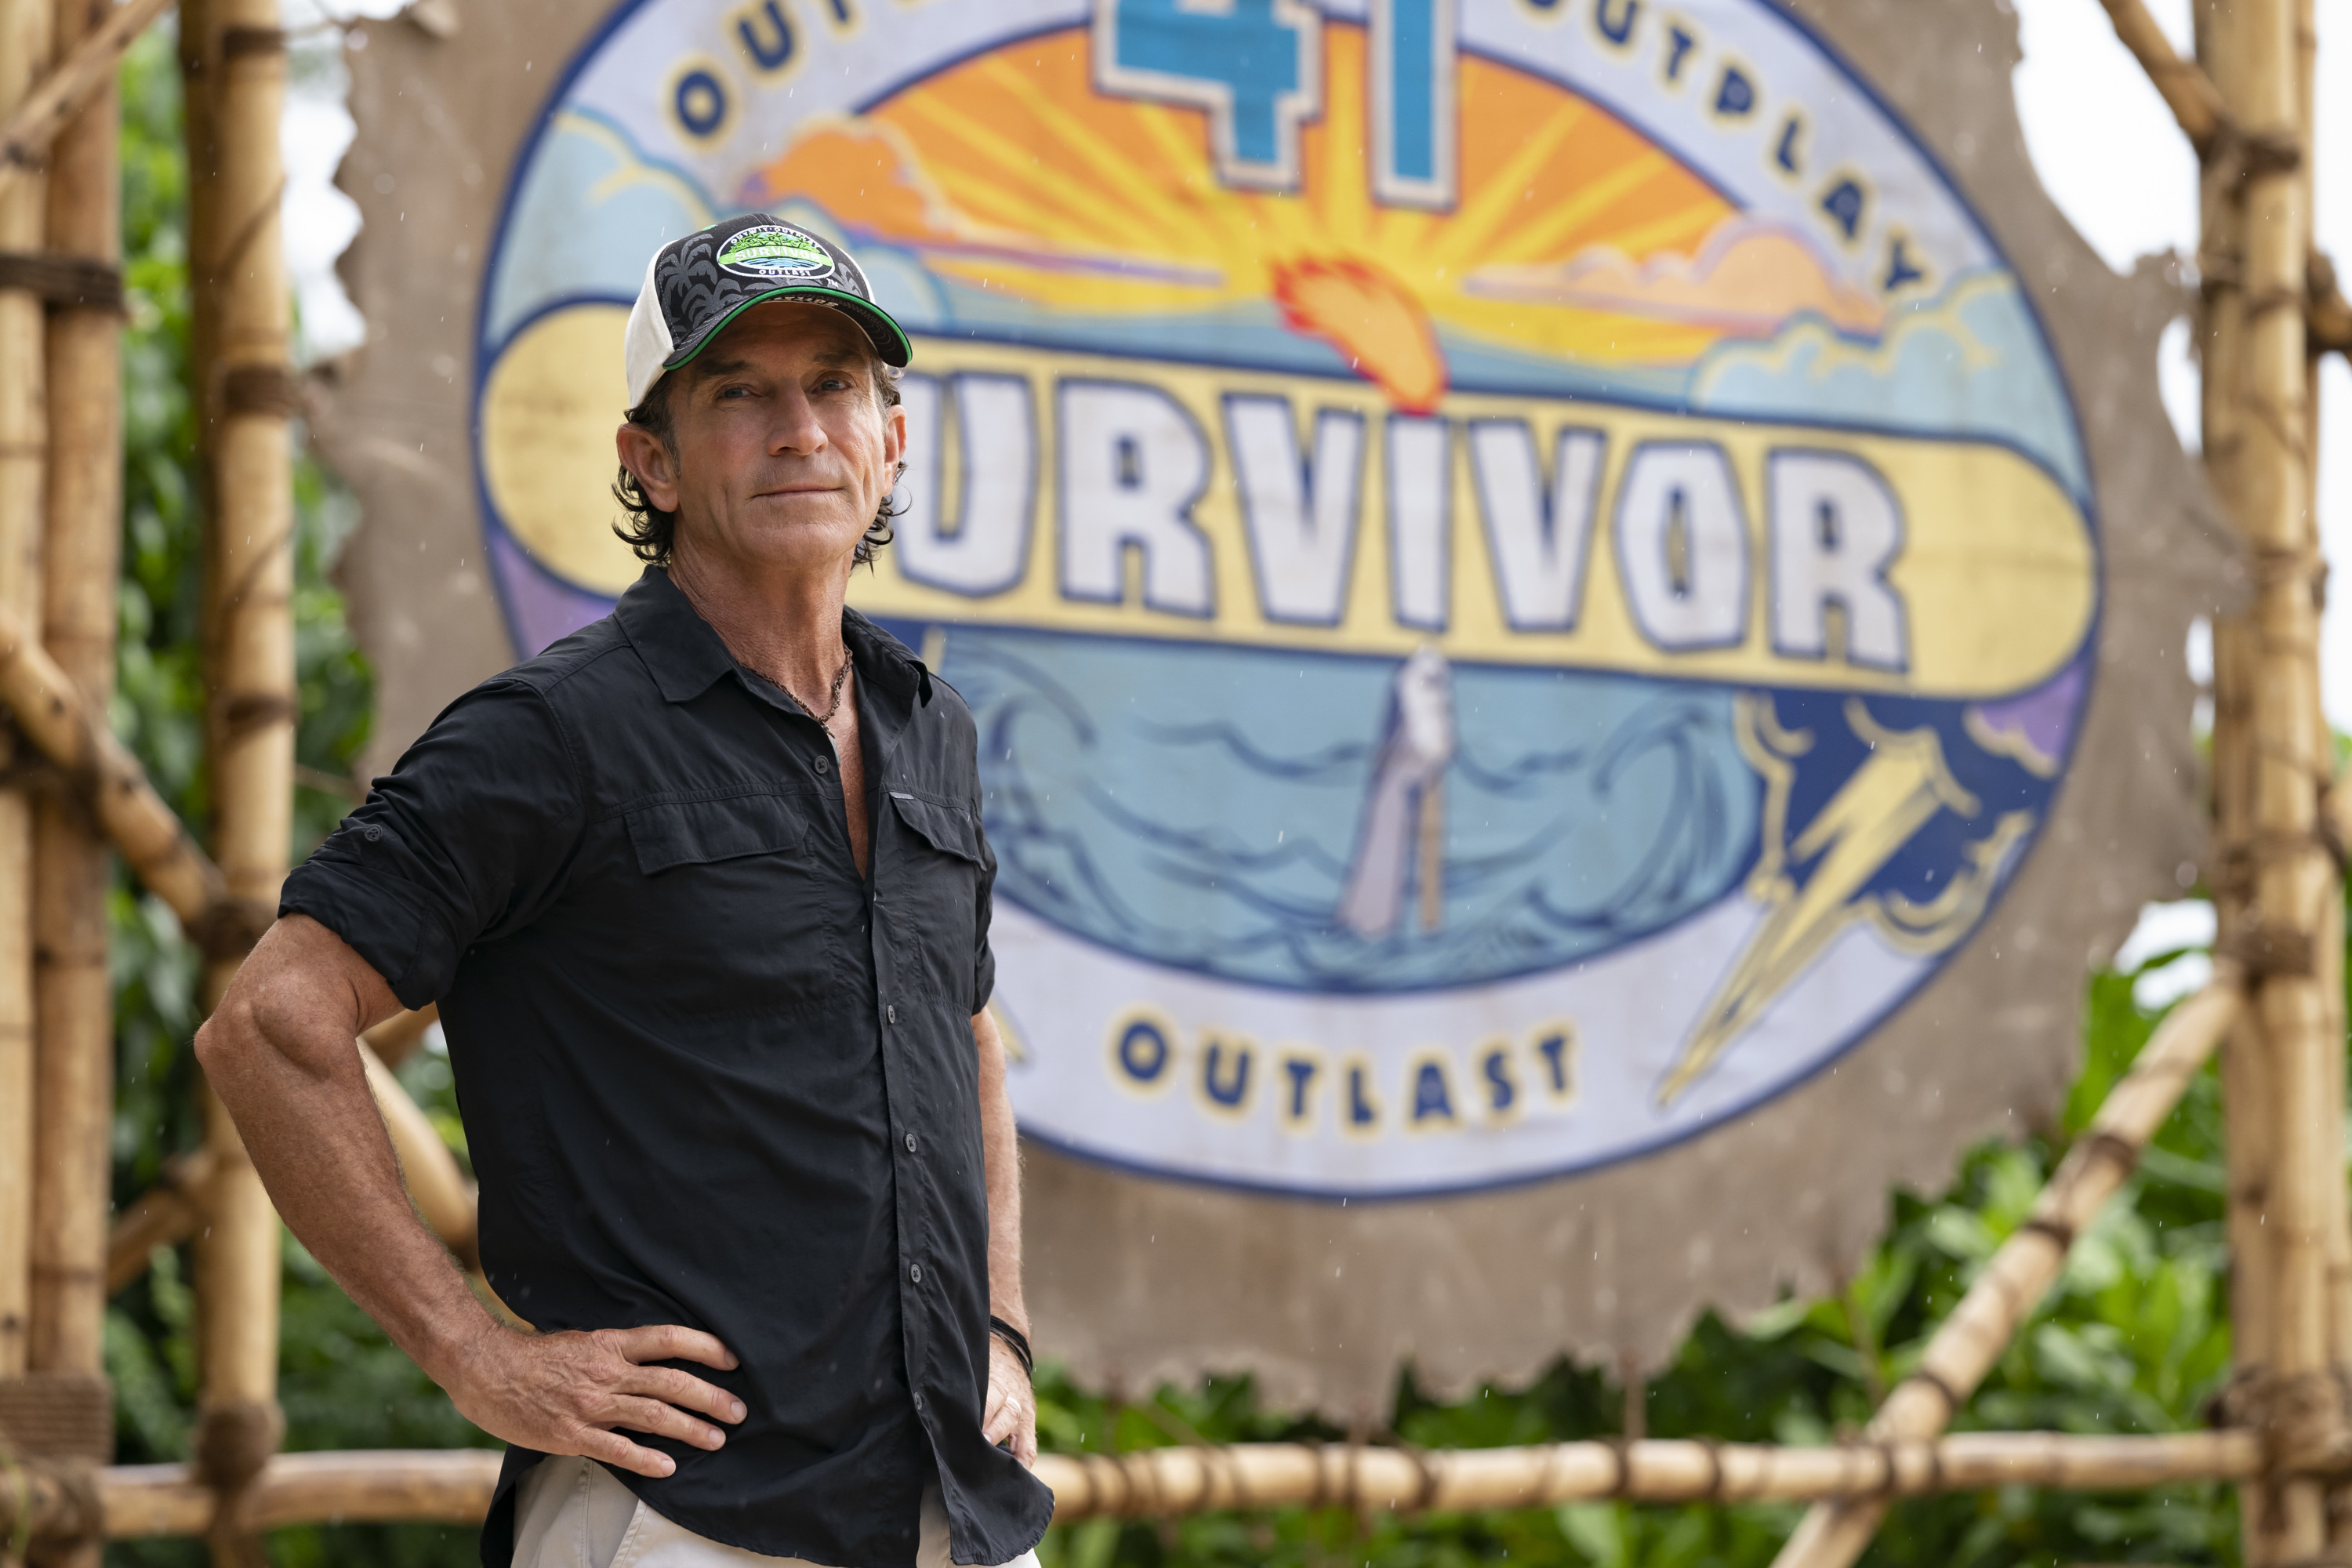 'Survivor 41' host Jeff Probst wears a black button-up shirt and a 'Survivor' hat. He stands in front of a 'Survivor 41' sign, a season with many new twists, including one called 'shot in the dark.'